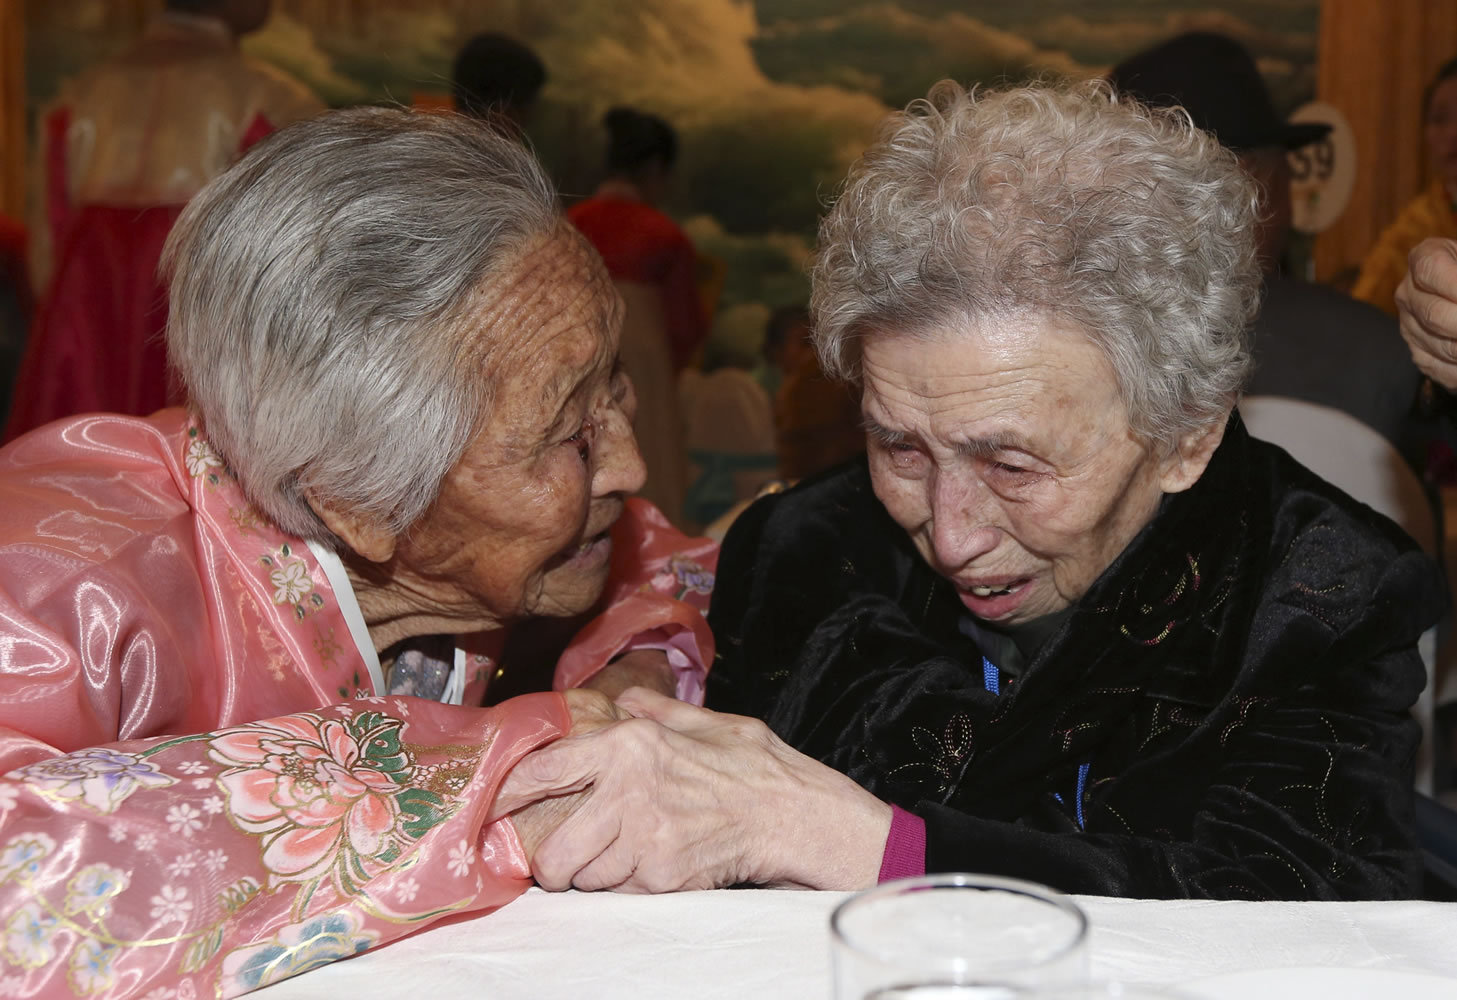 South Korean Lee Young-shil, 87, right, meets with her North Korean sister Lee Jong Shil, 84, during the Separated Family Reunion Meeting at Diamond Mountain resort in North Korea on Thursday.